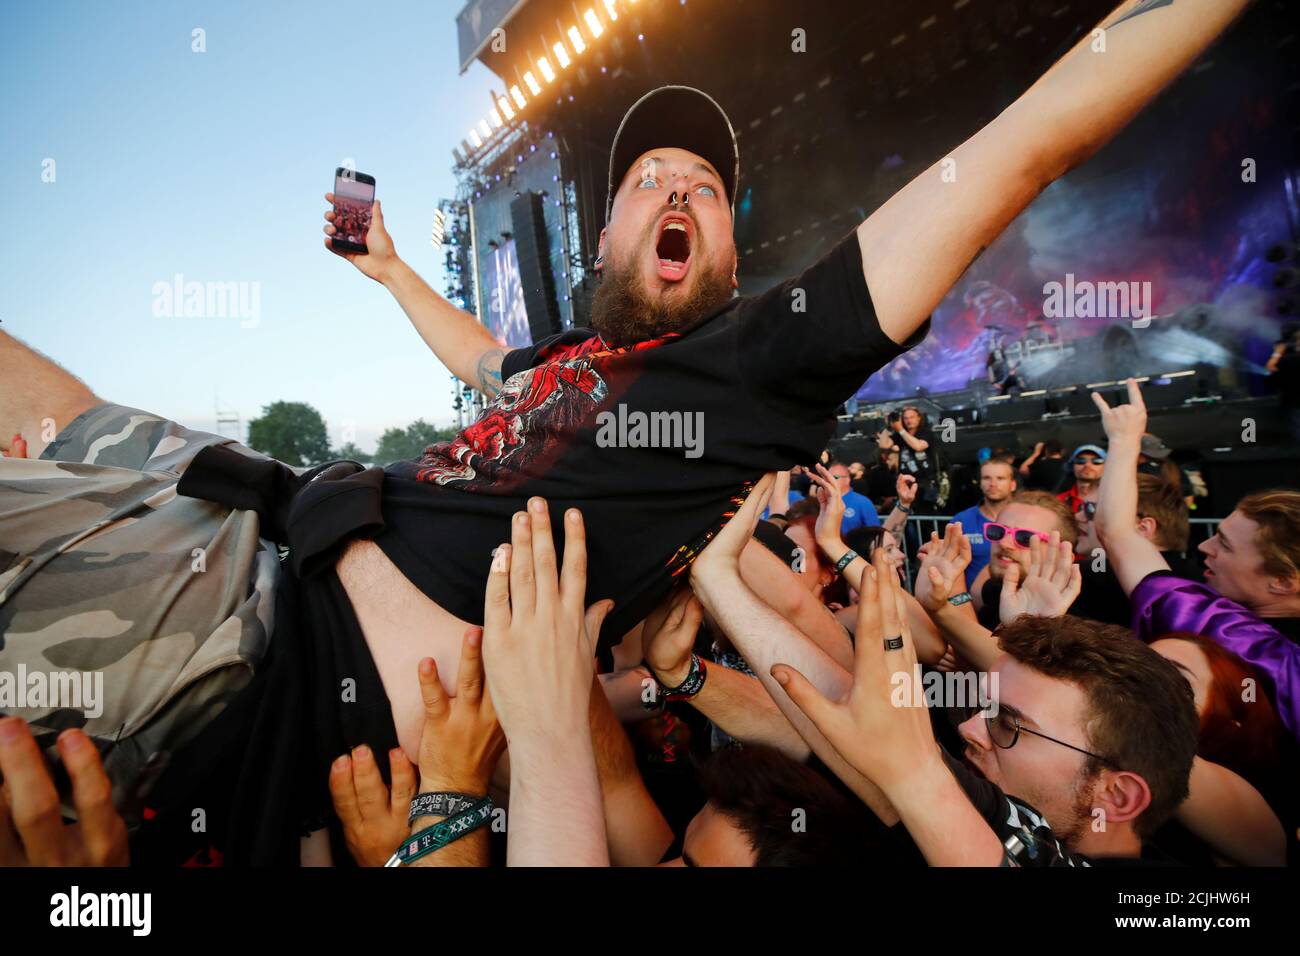 A fan takes a selfie as he surfs on top of the crowd during the performance  of the German power metal band Powerwolf at the world's largest heavy metal  festival, the Wacken